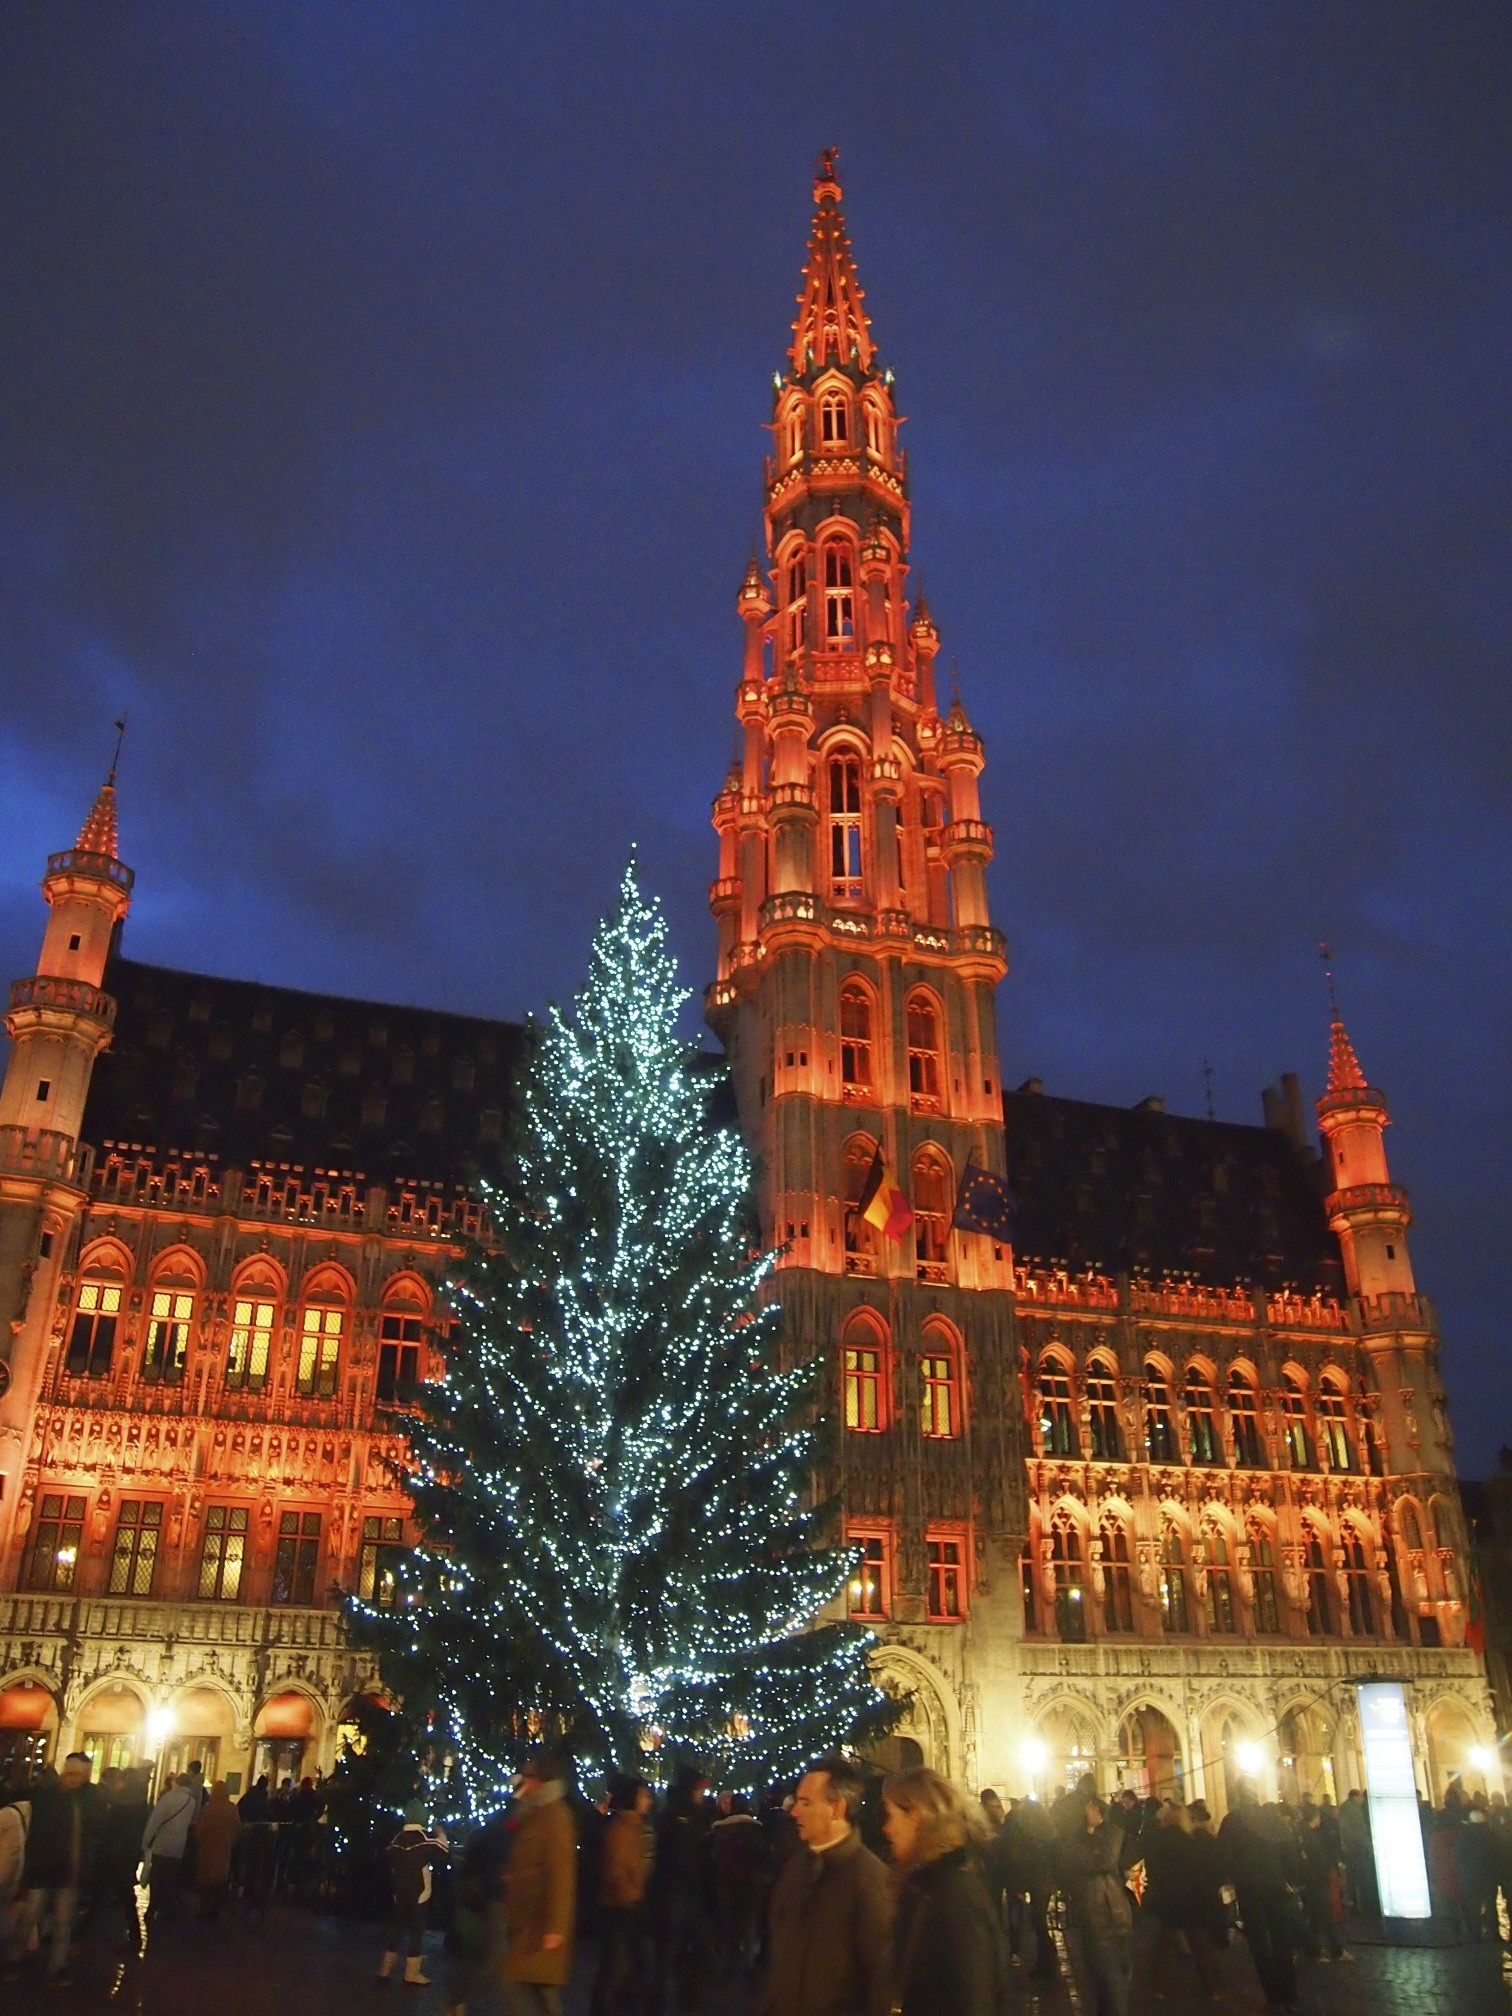 Grand place in brussels photo